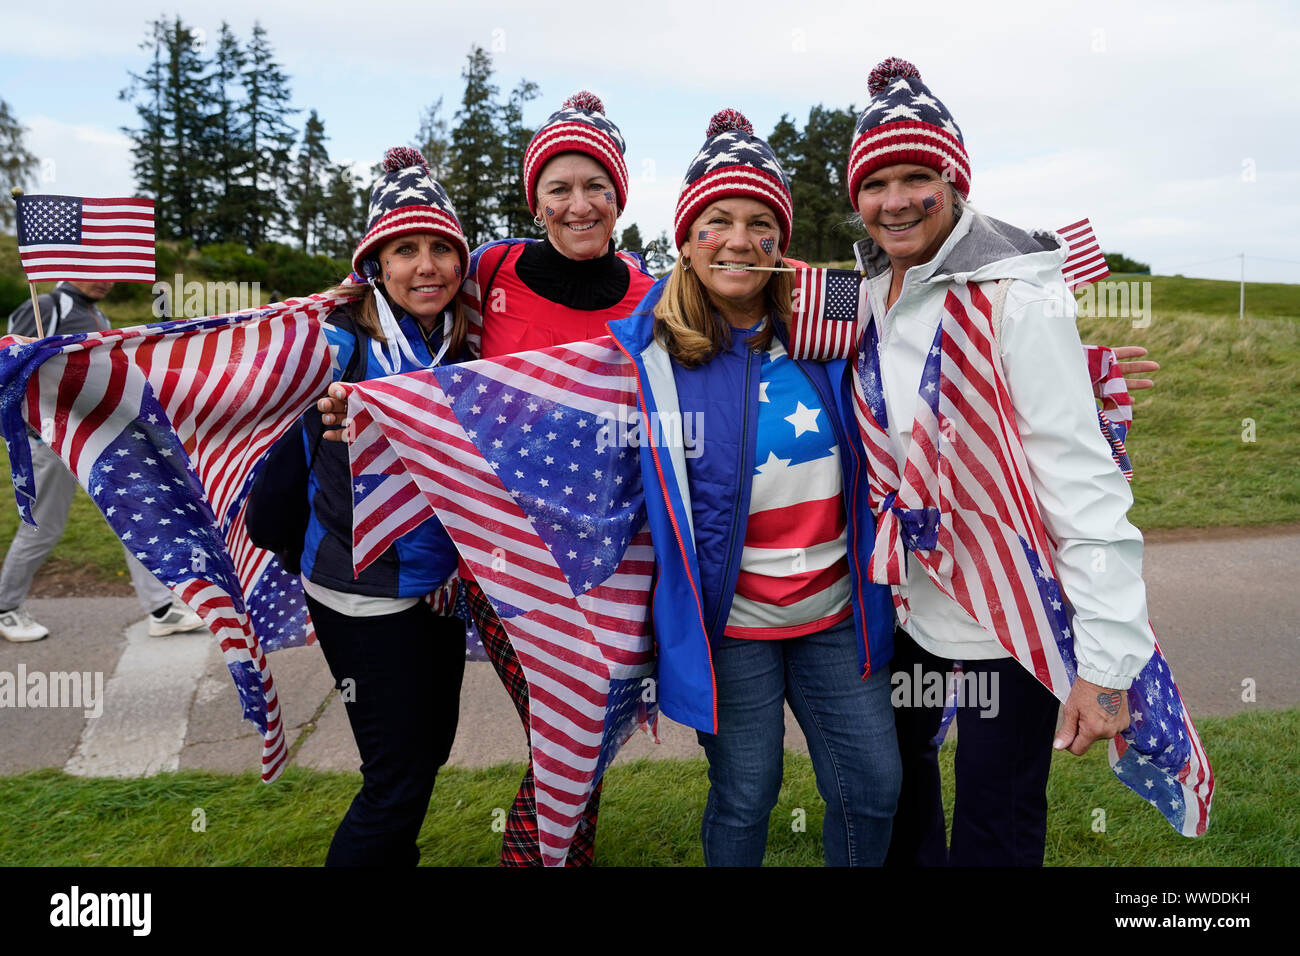 Auchterarder, Scotland, UK. 15 September 2019. Sunday Singles matches on final day  at 2019 Solheim Cup on Centenary Course at Gleneagles. Pictured; Enthusiastic Team USA fans with flag beside the 7th green. Iain Masterton/Alamy Live News Stock Photo